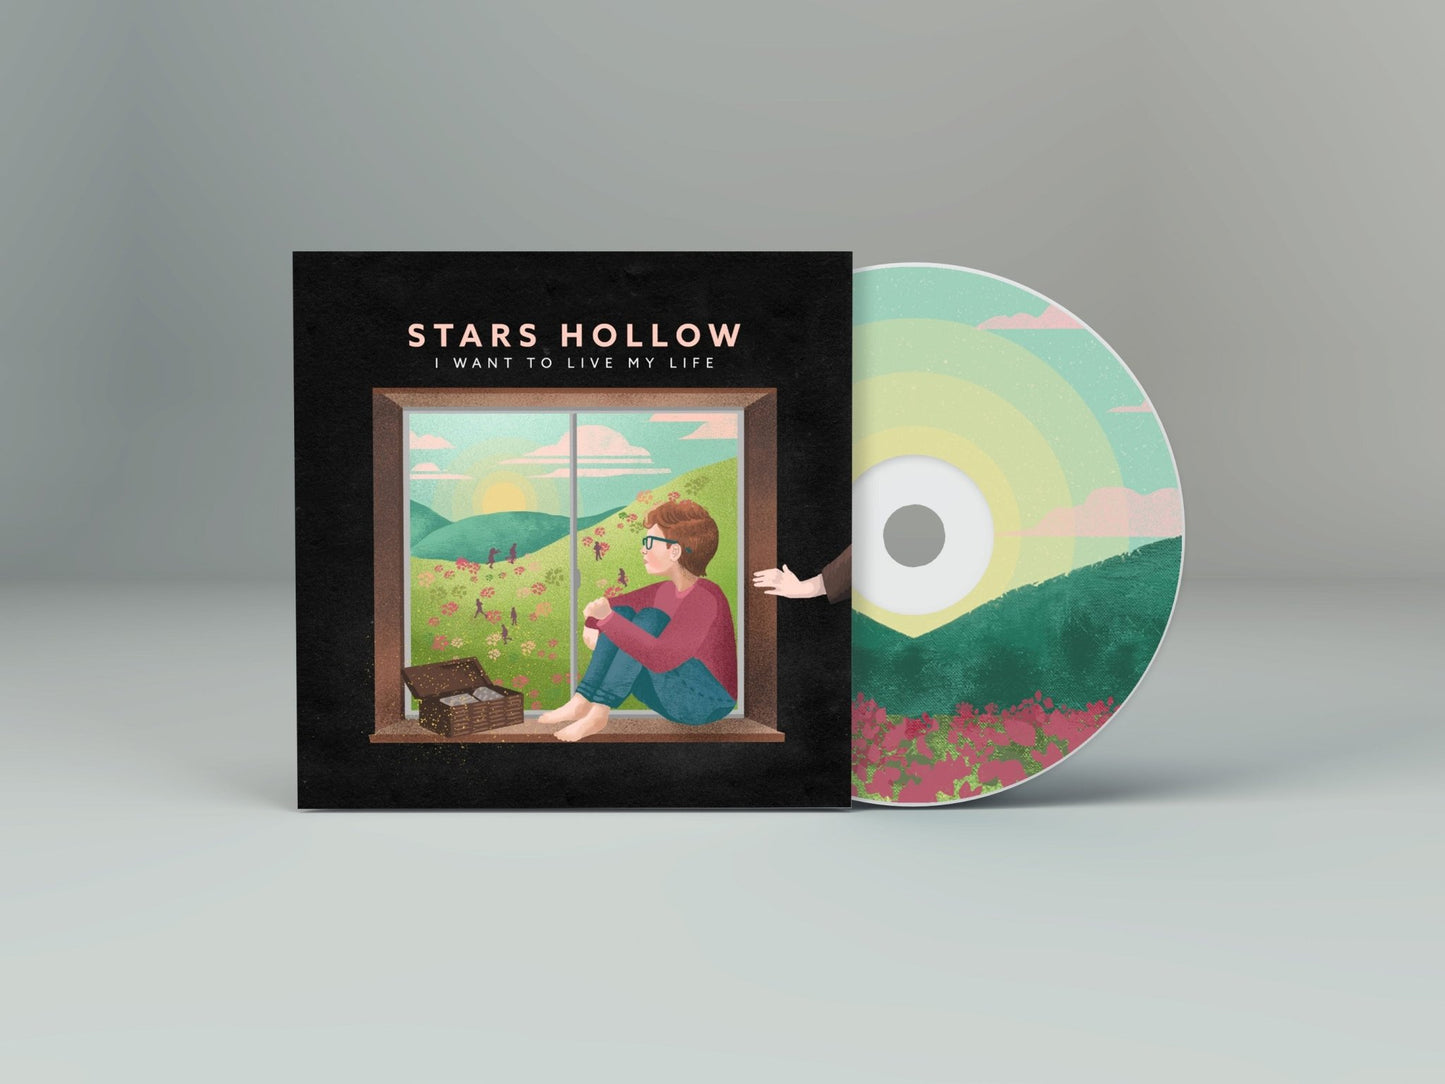 Stars Hollow - "I Want To Live My Life" - Acrobat Unstable Records